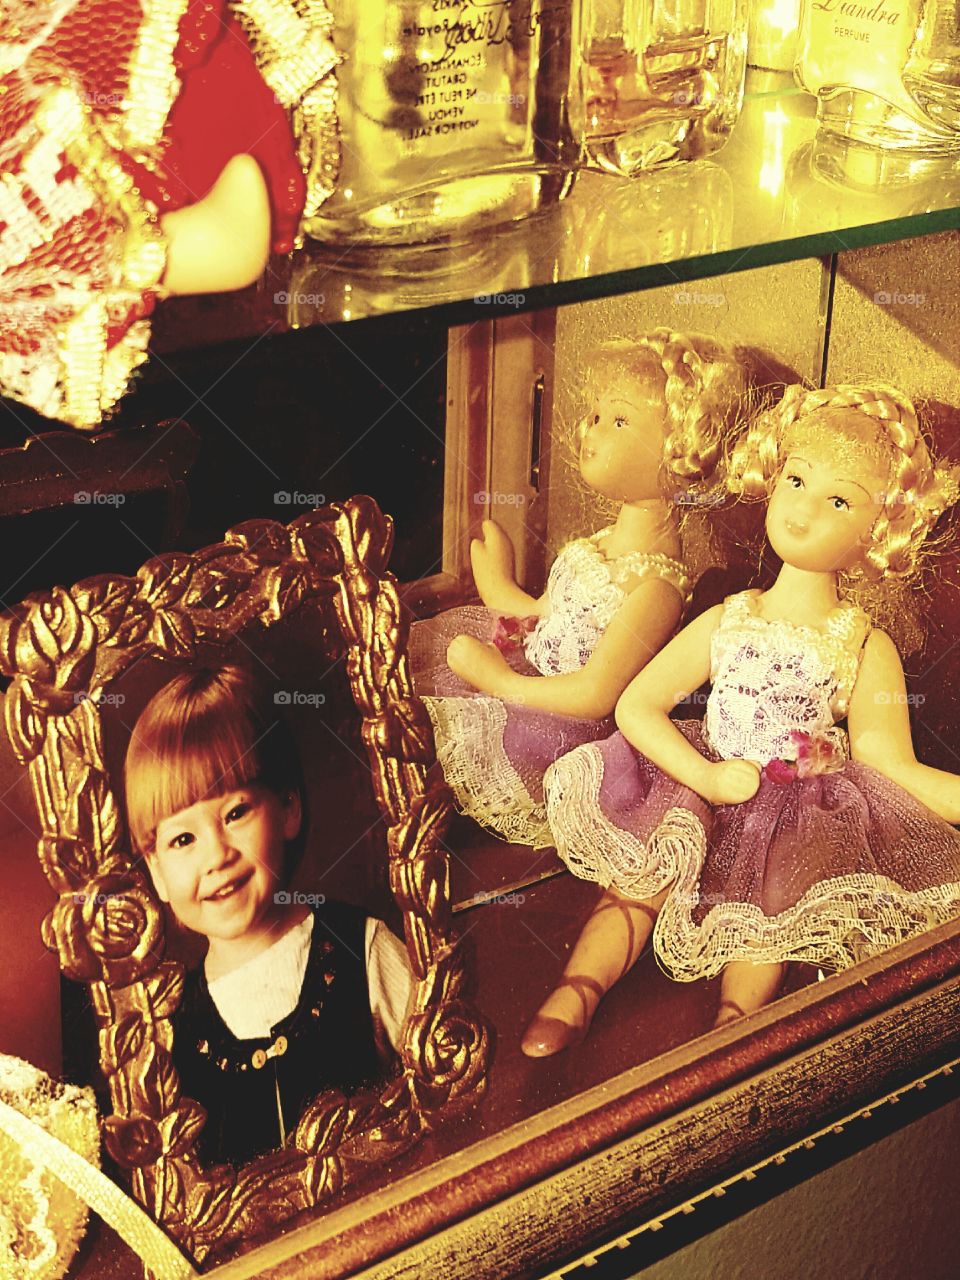 My younger sister has been collecting odds and ends since she first saw our mom's shadow box as a toddler. This mirrored miniature cabinet housing her dolls, jars and photo is just one of those collectibles left over from her earlier days.